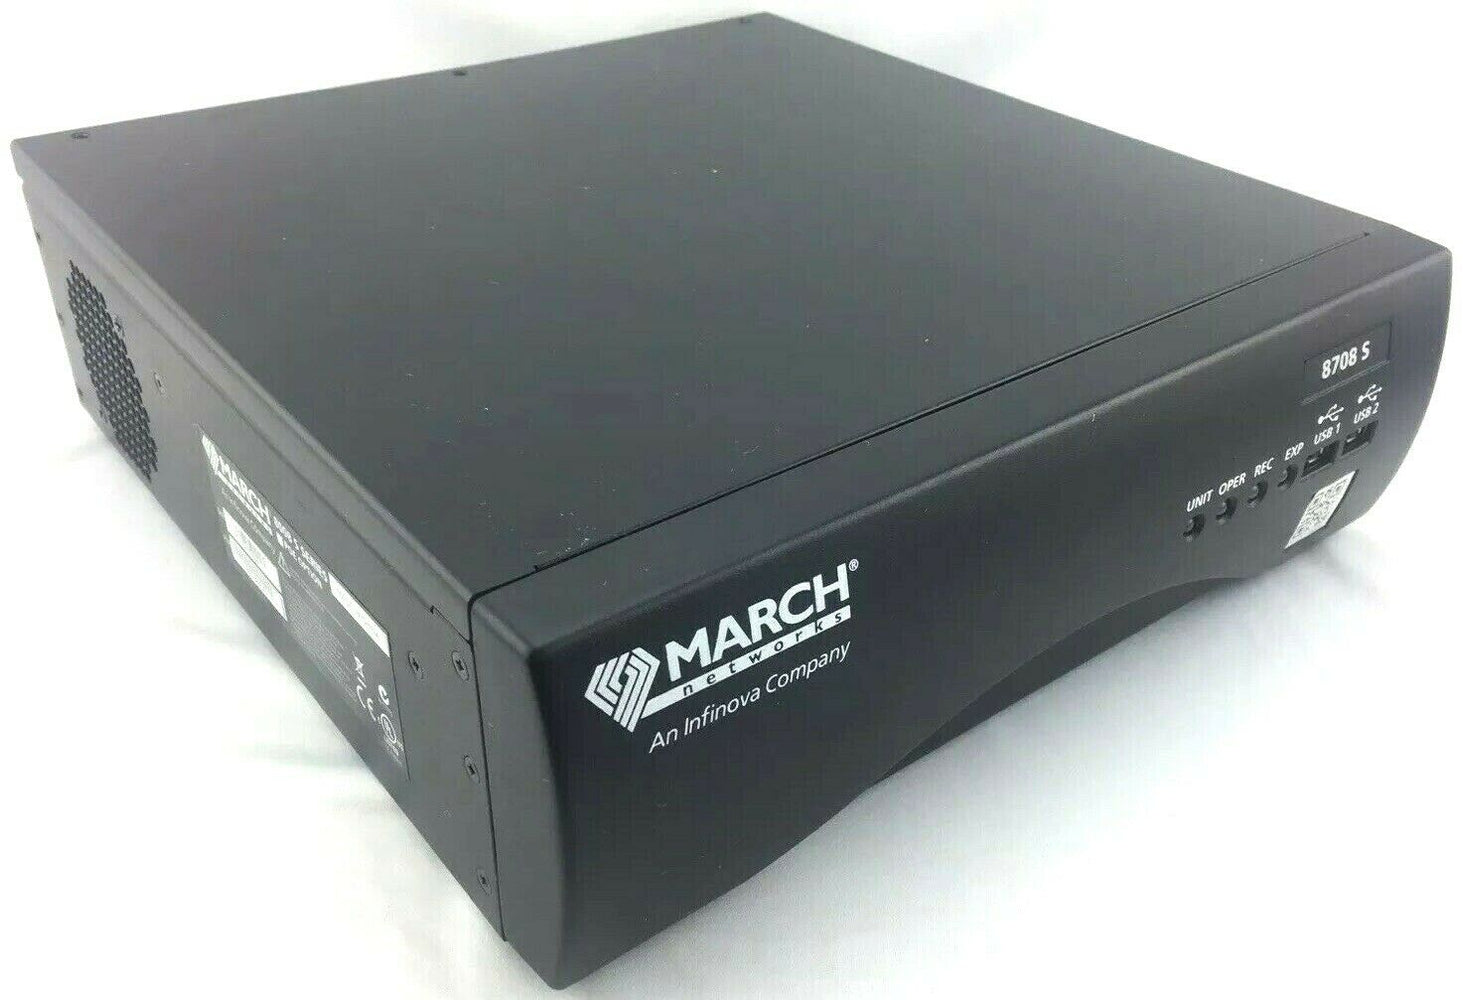 March Networks 8708 S 28570-106R1.2 8008 S Series 8-Channel Recording Platform